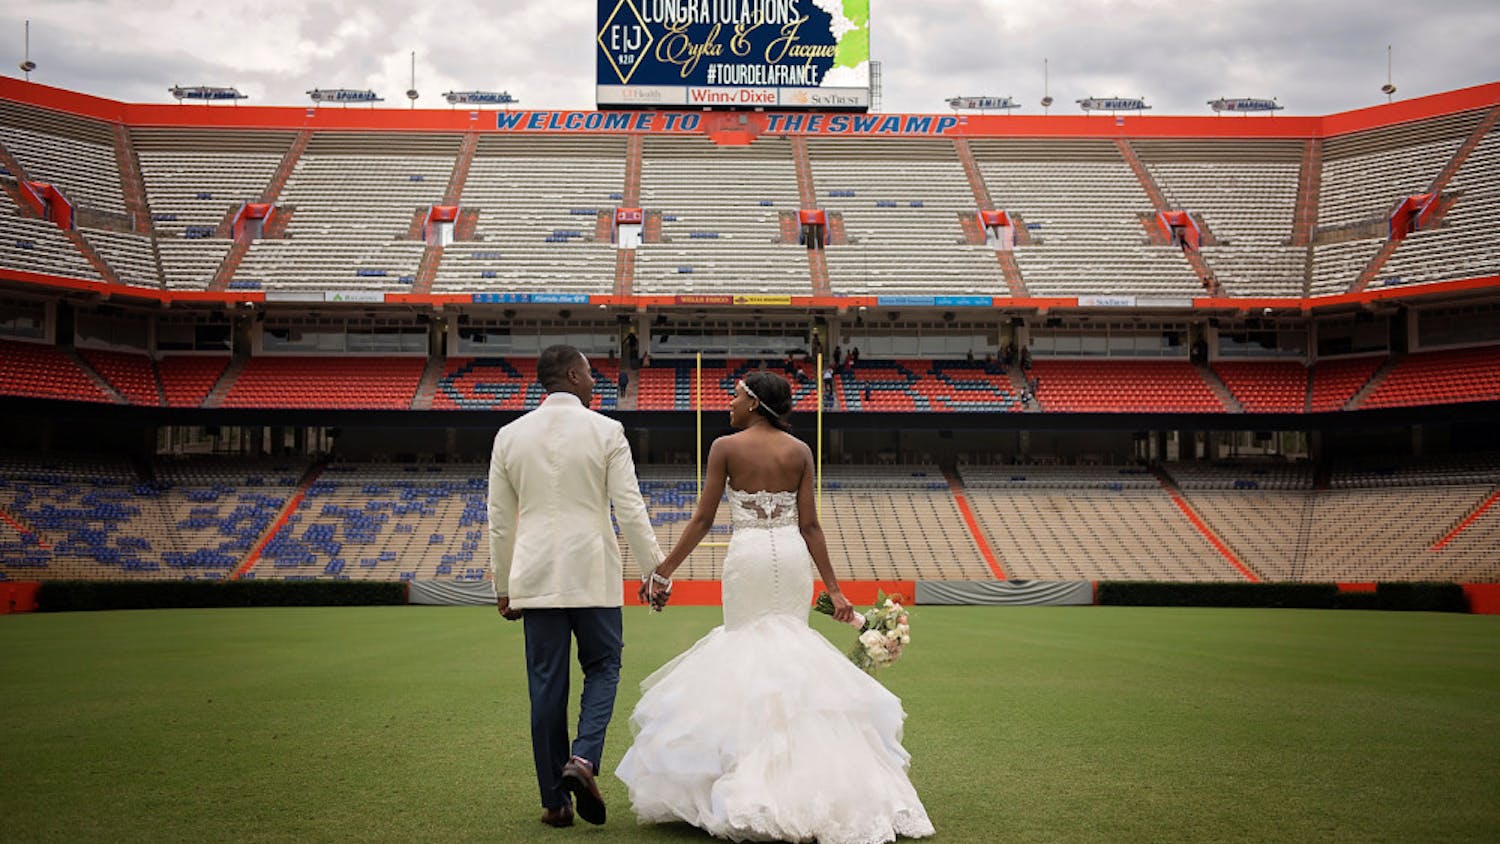 Eryka and Jacques LaFrance held their wedding ceremony in the Ben Hill Griffin Stadium on Sept. 2, 2017. Eryka LaFrance grew up in Gainesville and wanted to get married in a place close to her heart and childhood. 